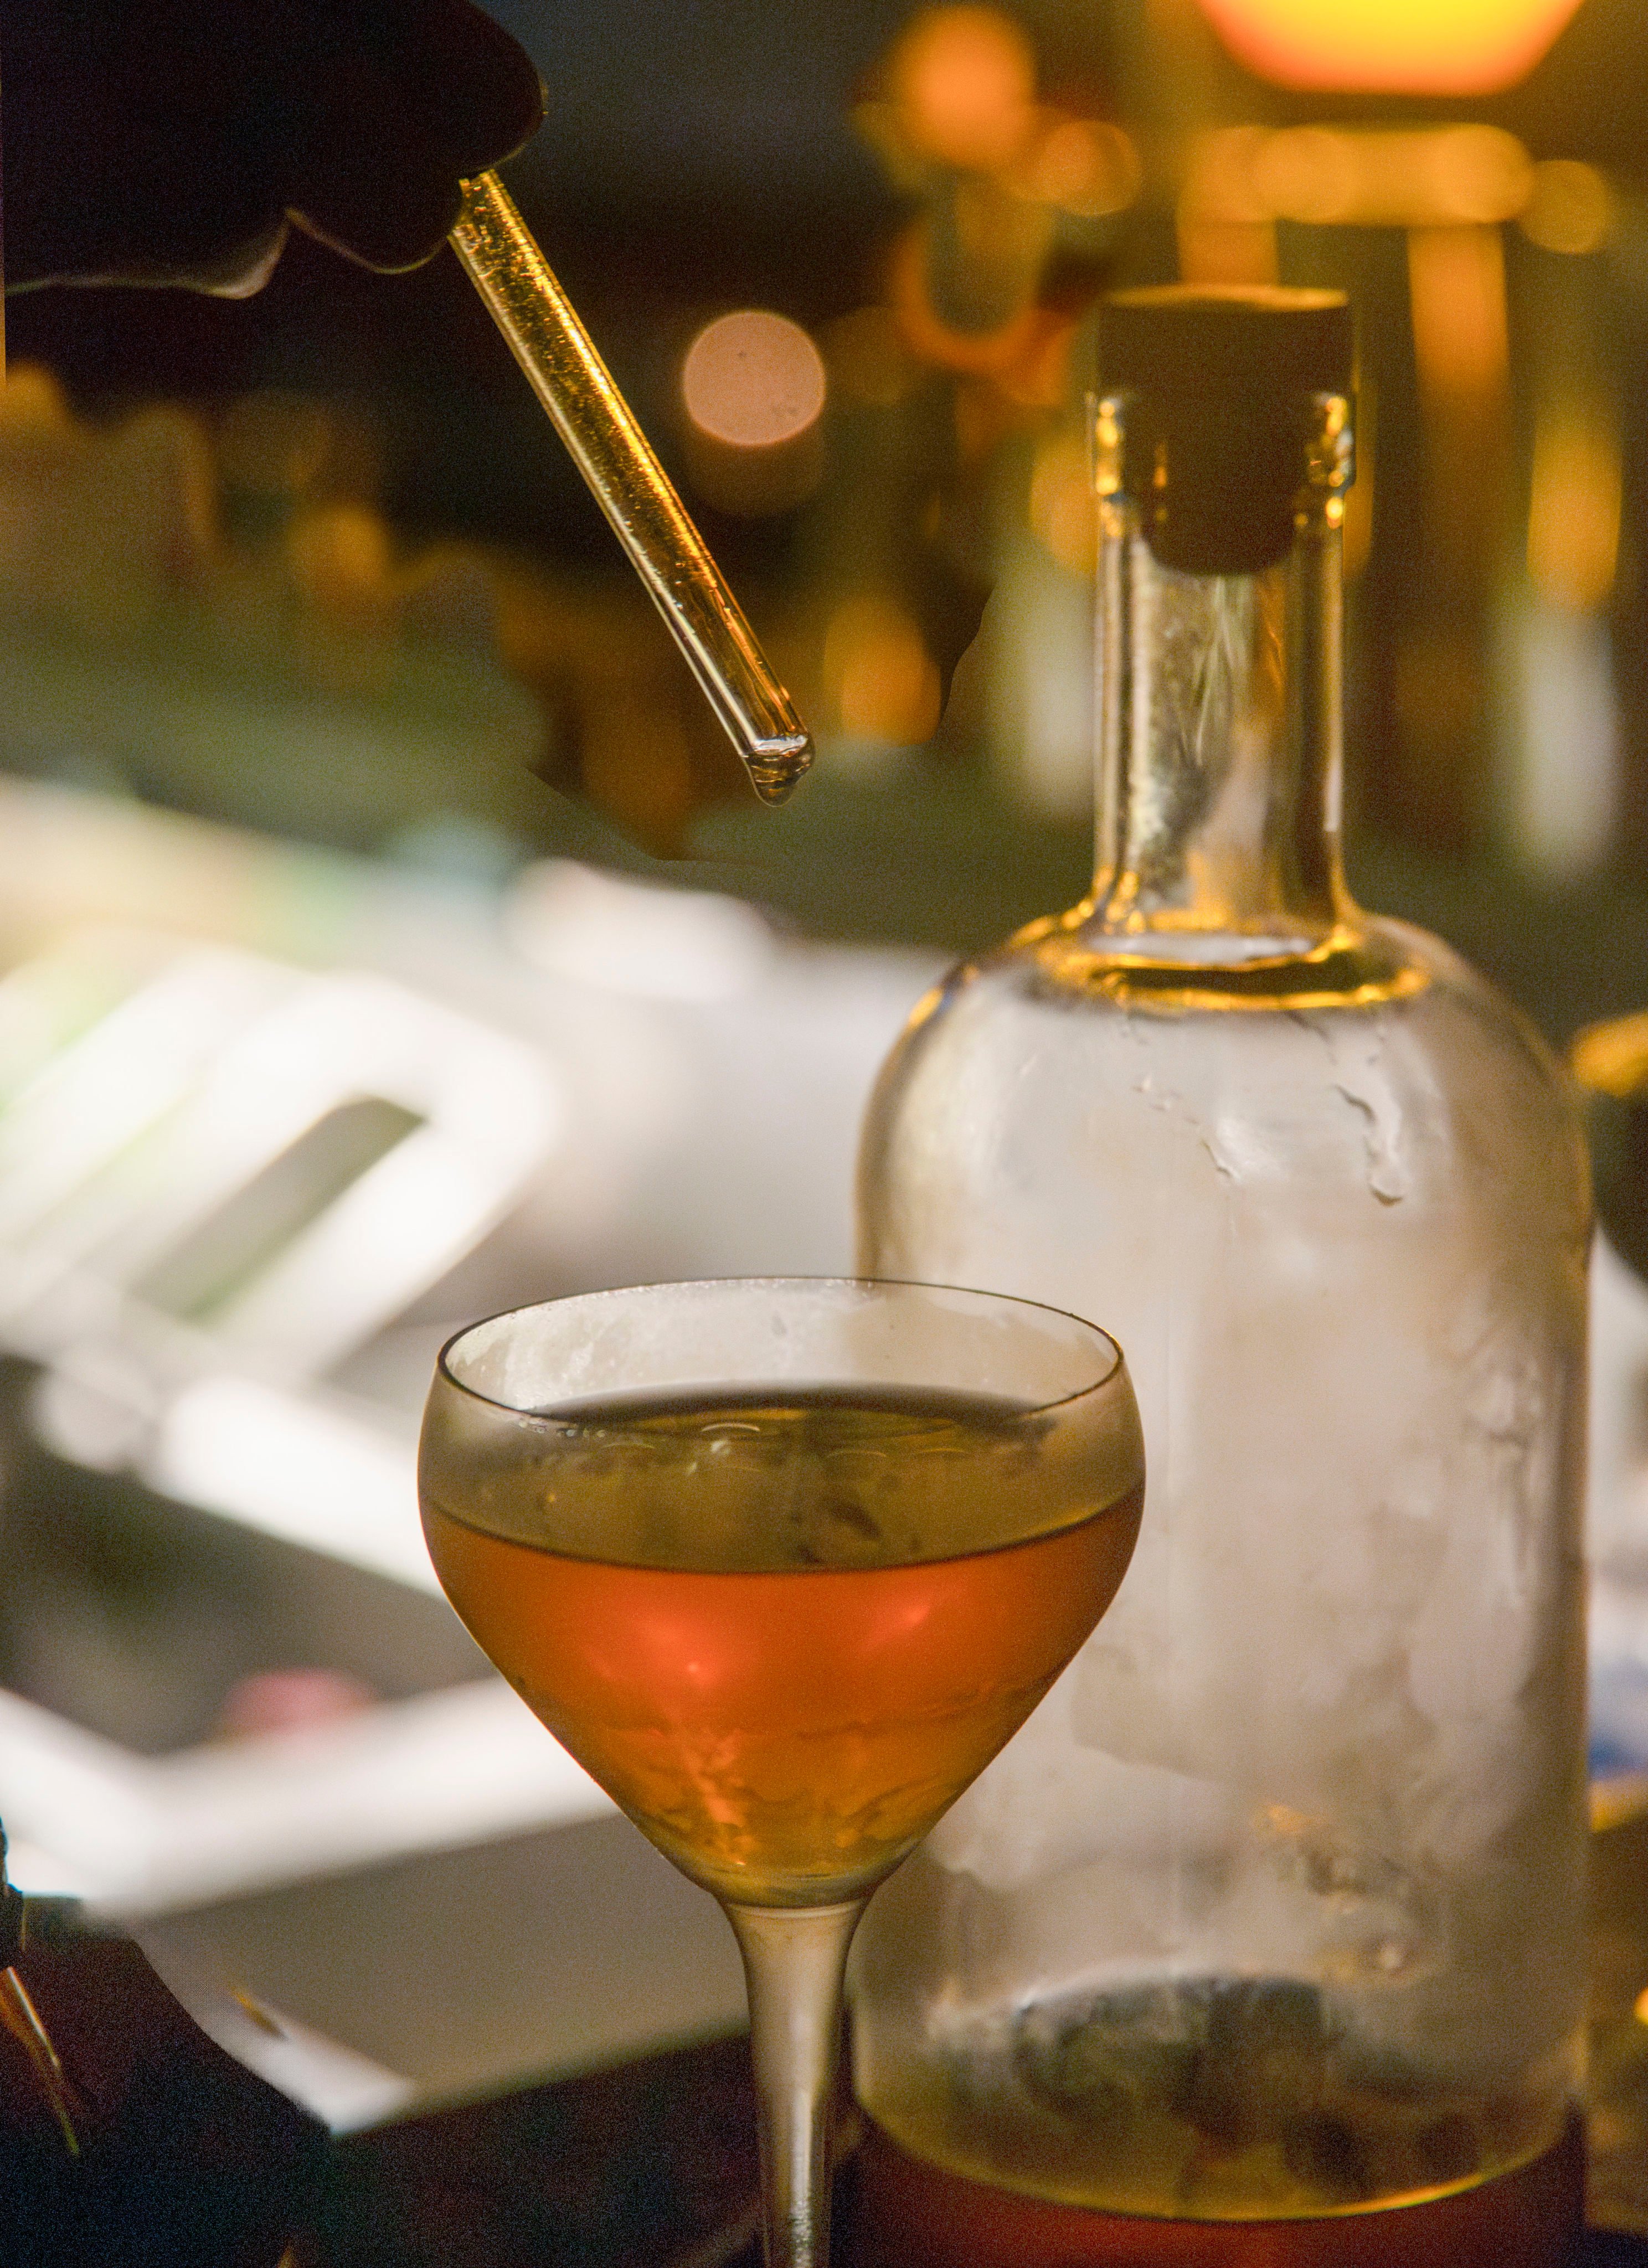 Buenos Aires’ CoChinChina cocktail bar offers a smooth reinvention of the Manhattan. Photo: Kicca Tommassi